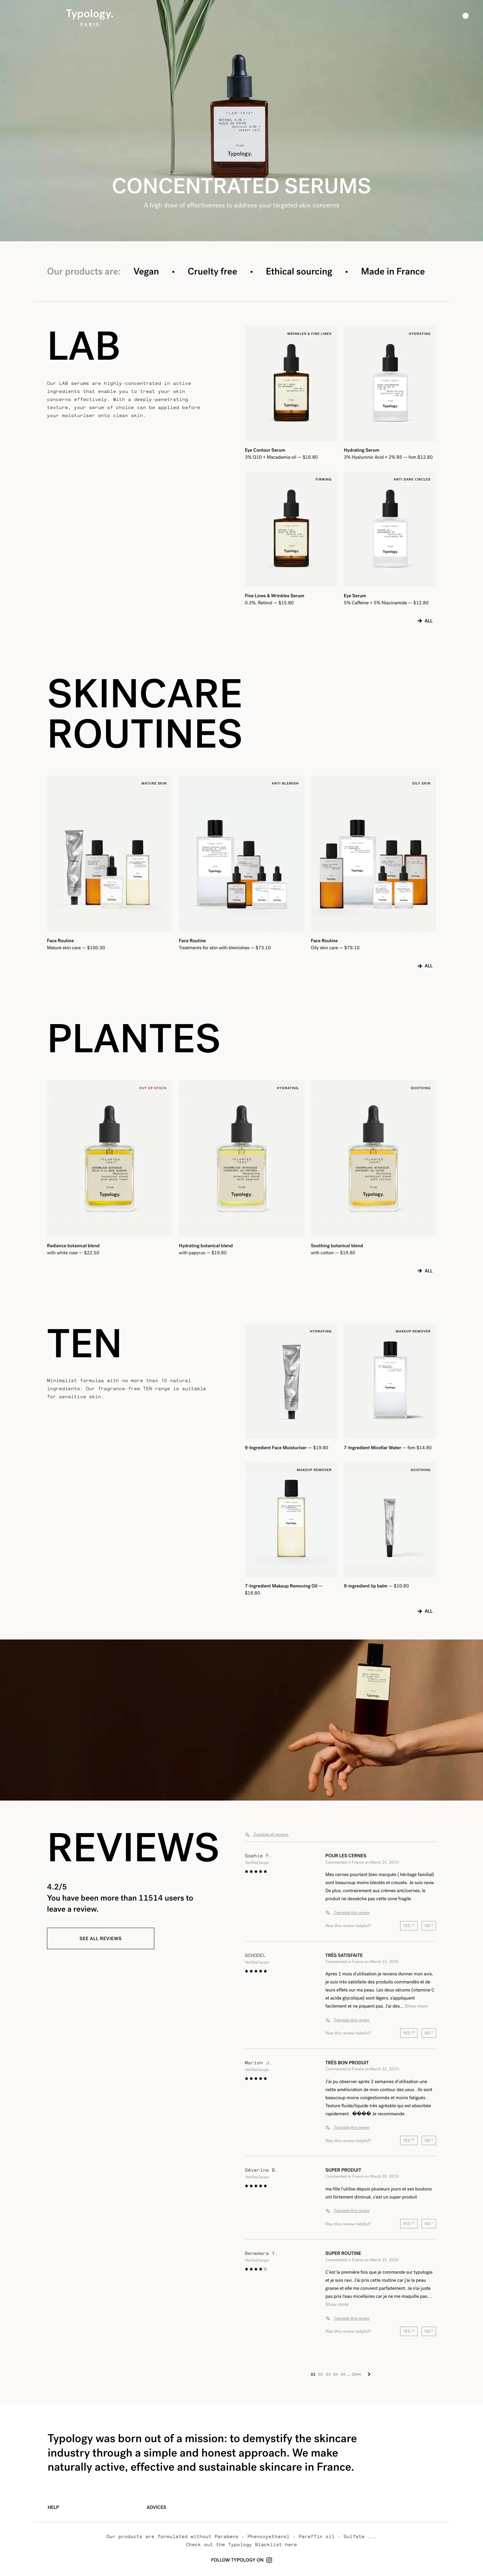 Typology Landing Page Example: A high dose of effectiveness to address your targeted skin concerns. Typology was born out of a mission: to demystify the skincare industry through a simple and honest approach. We make naturally active, effective and sustainable skincare in France.